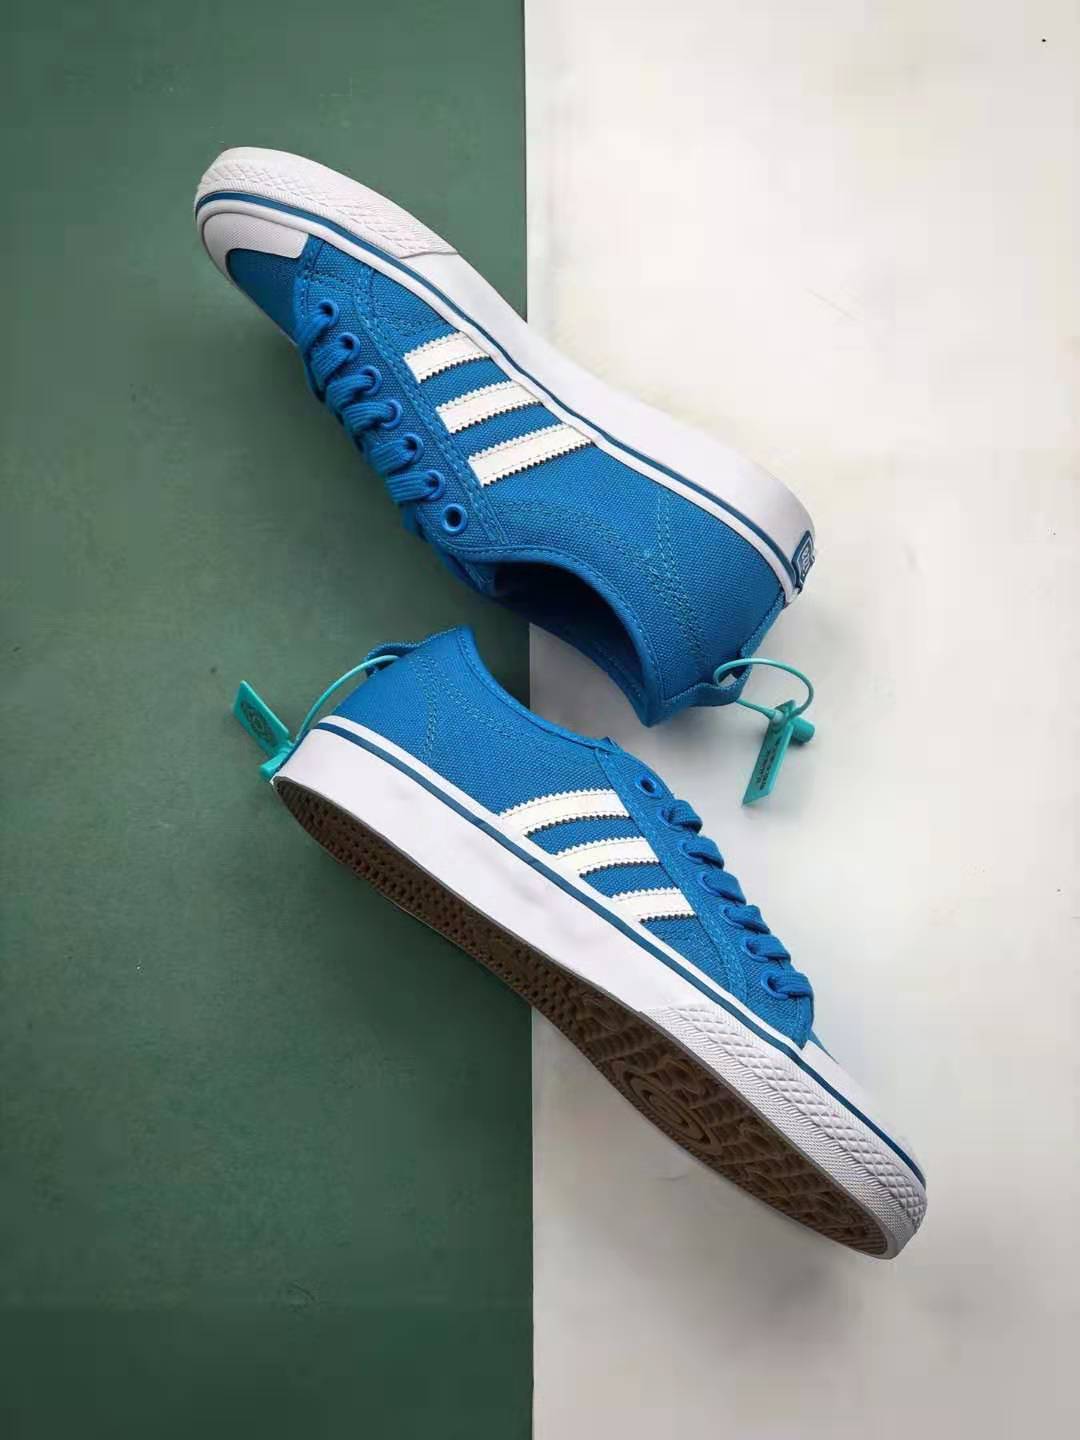 Adidas Nizza 'Footwear White' CQ2333 - Classic Style with a Clean Finish